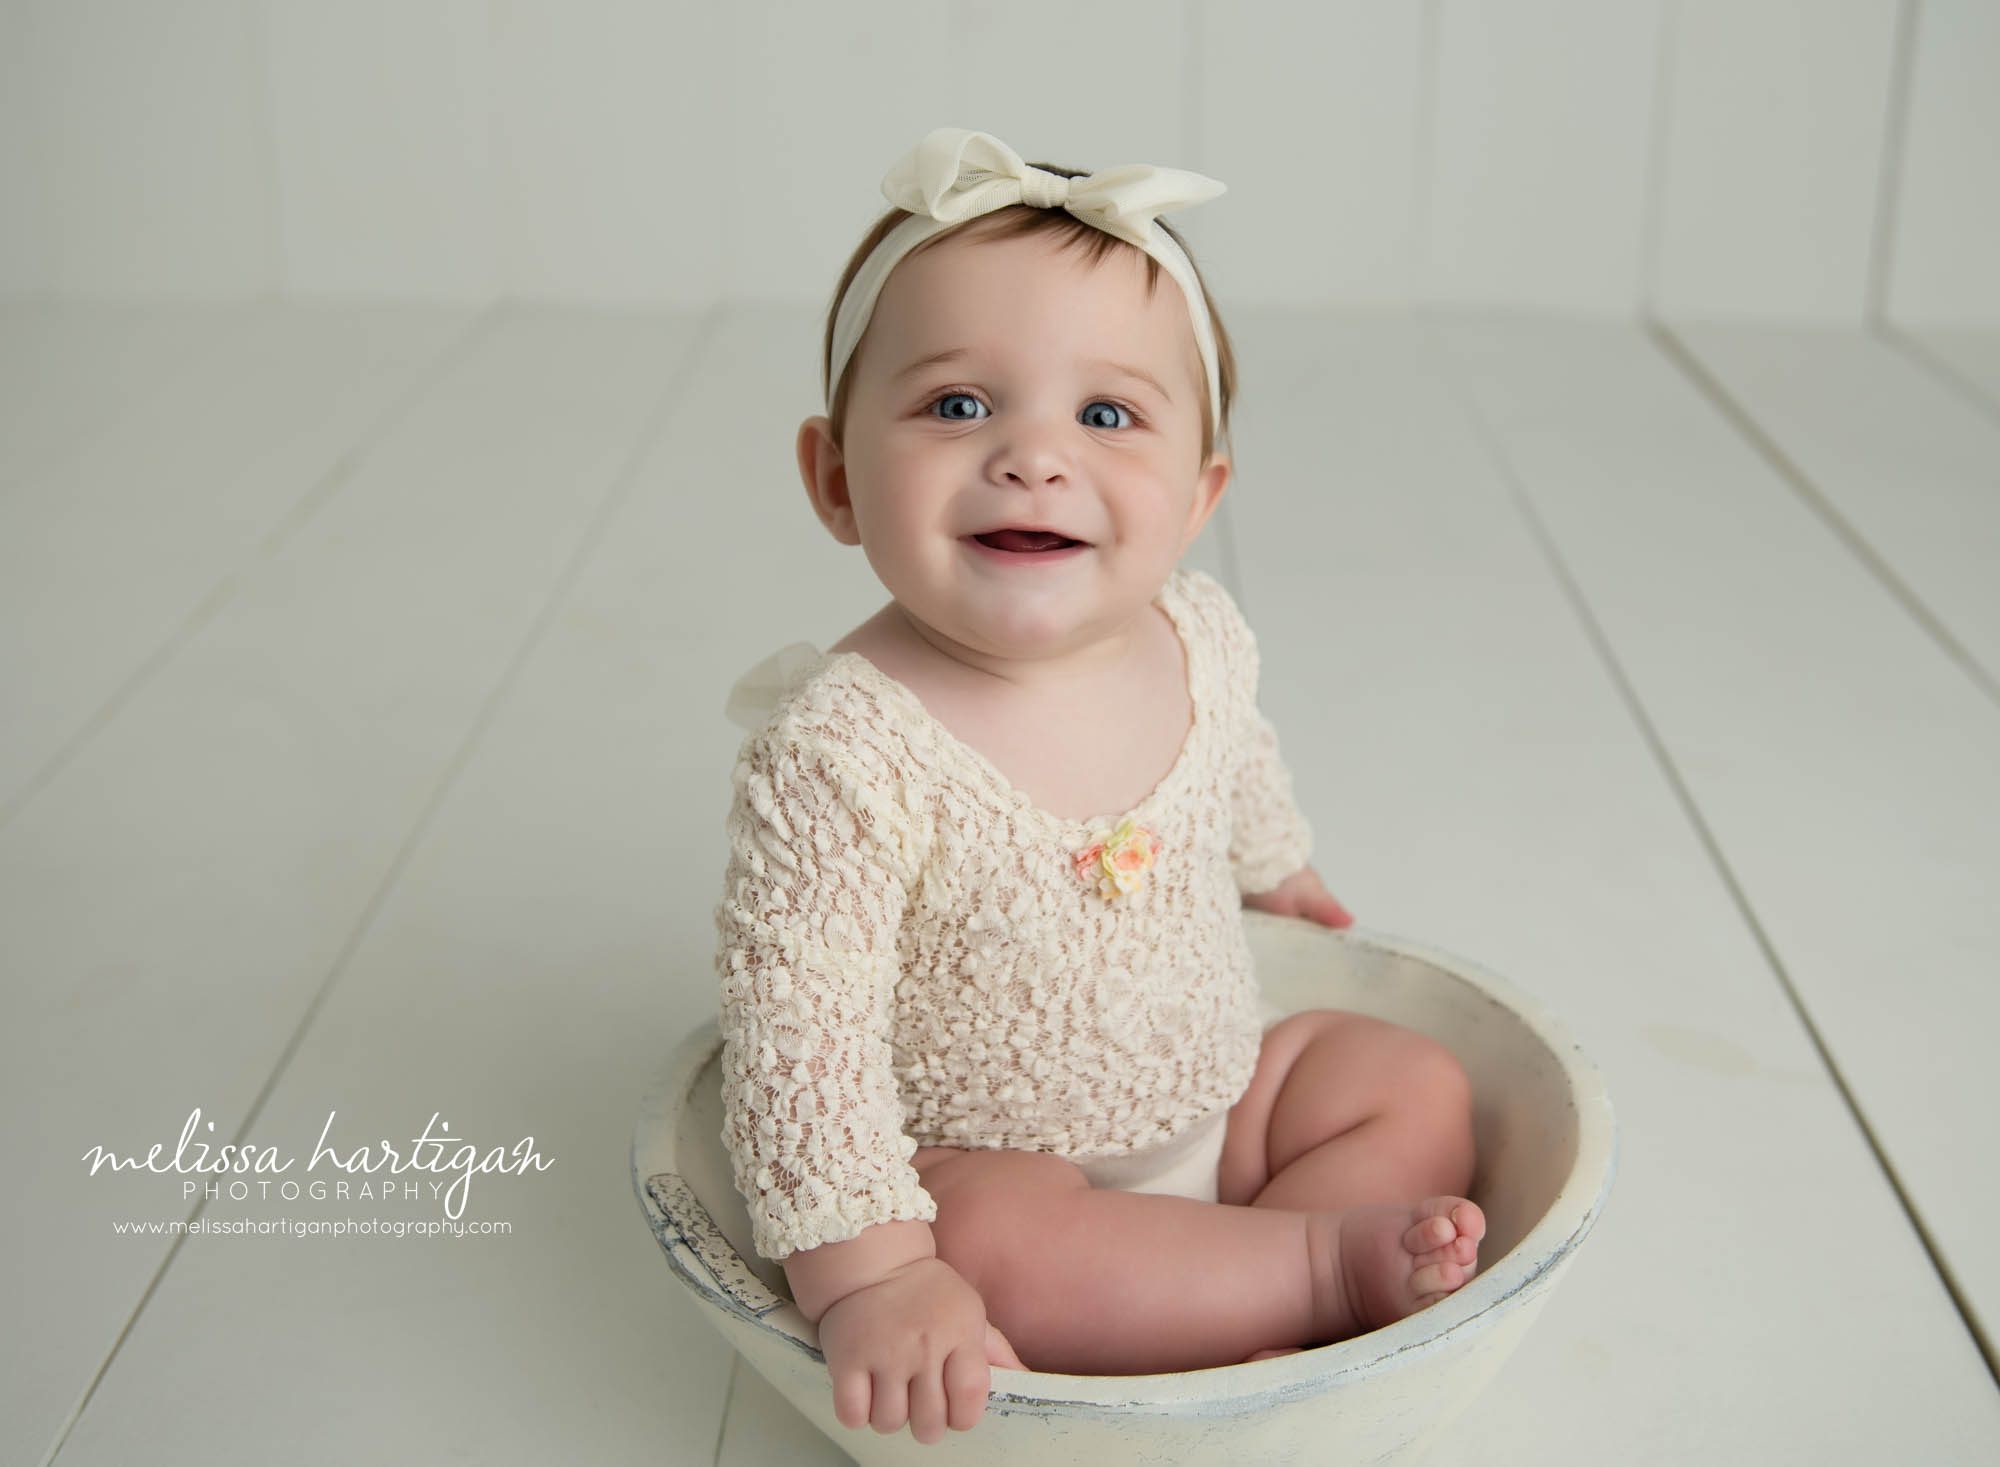 baby girl sitting in wooden bowl wearing lace outfit and bow headband CT baby photography